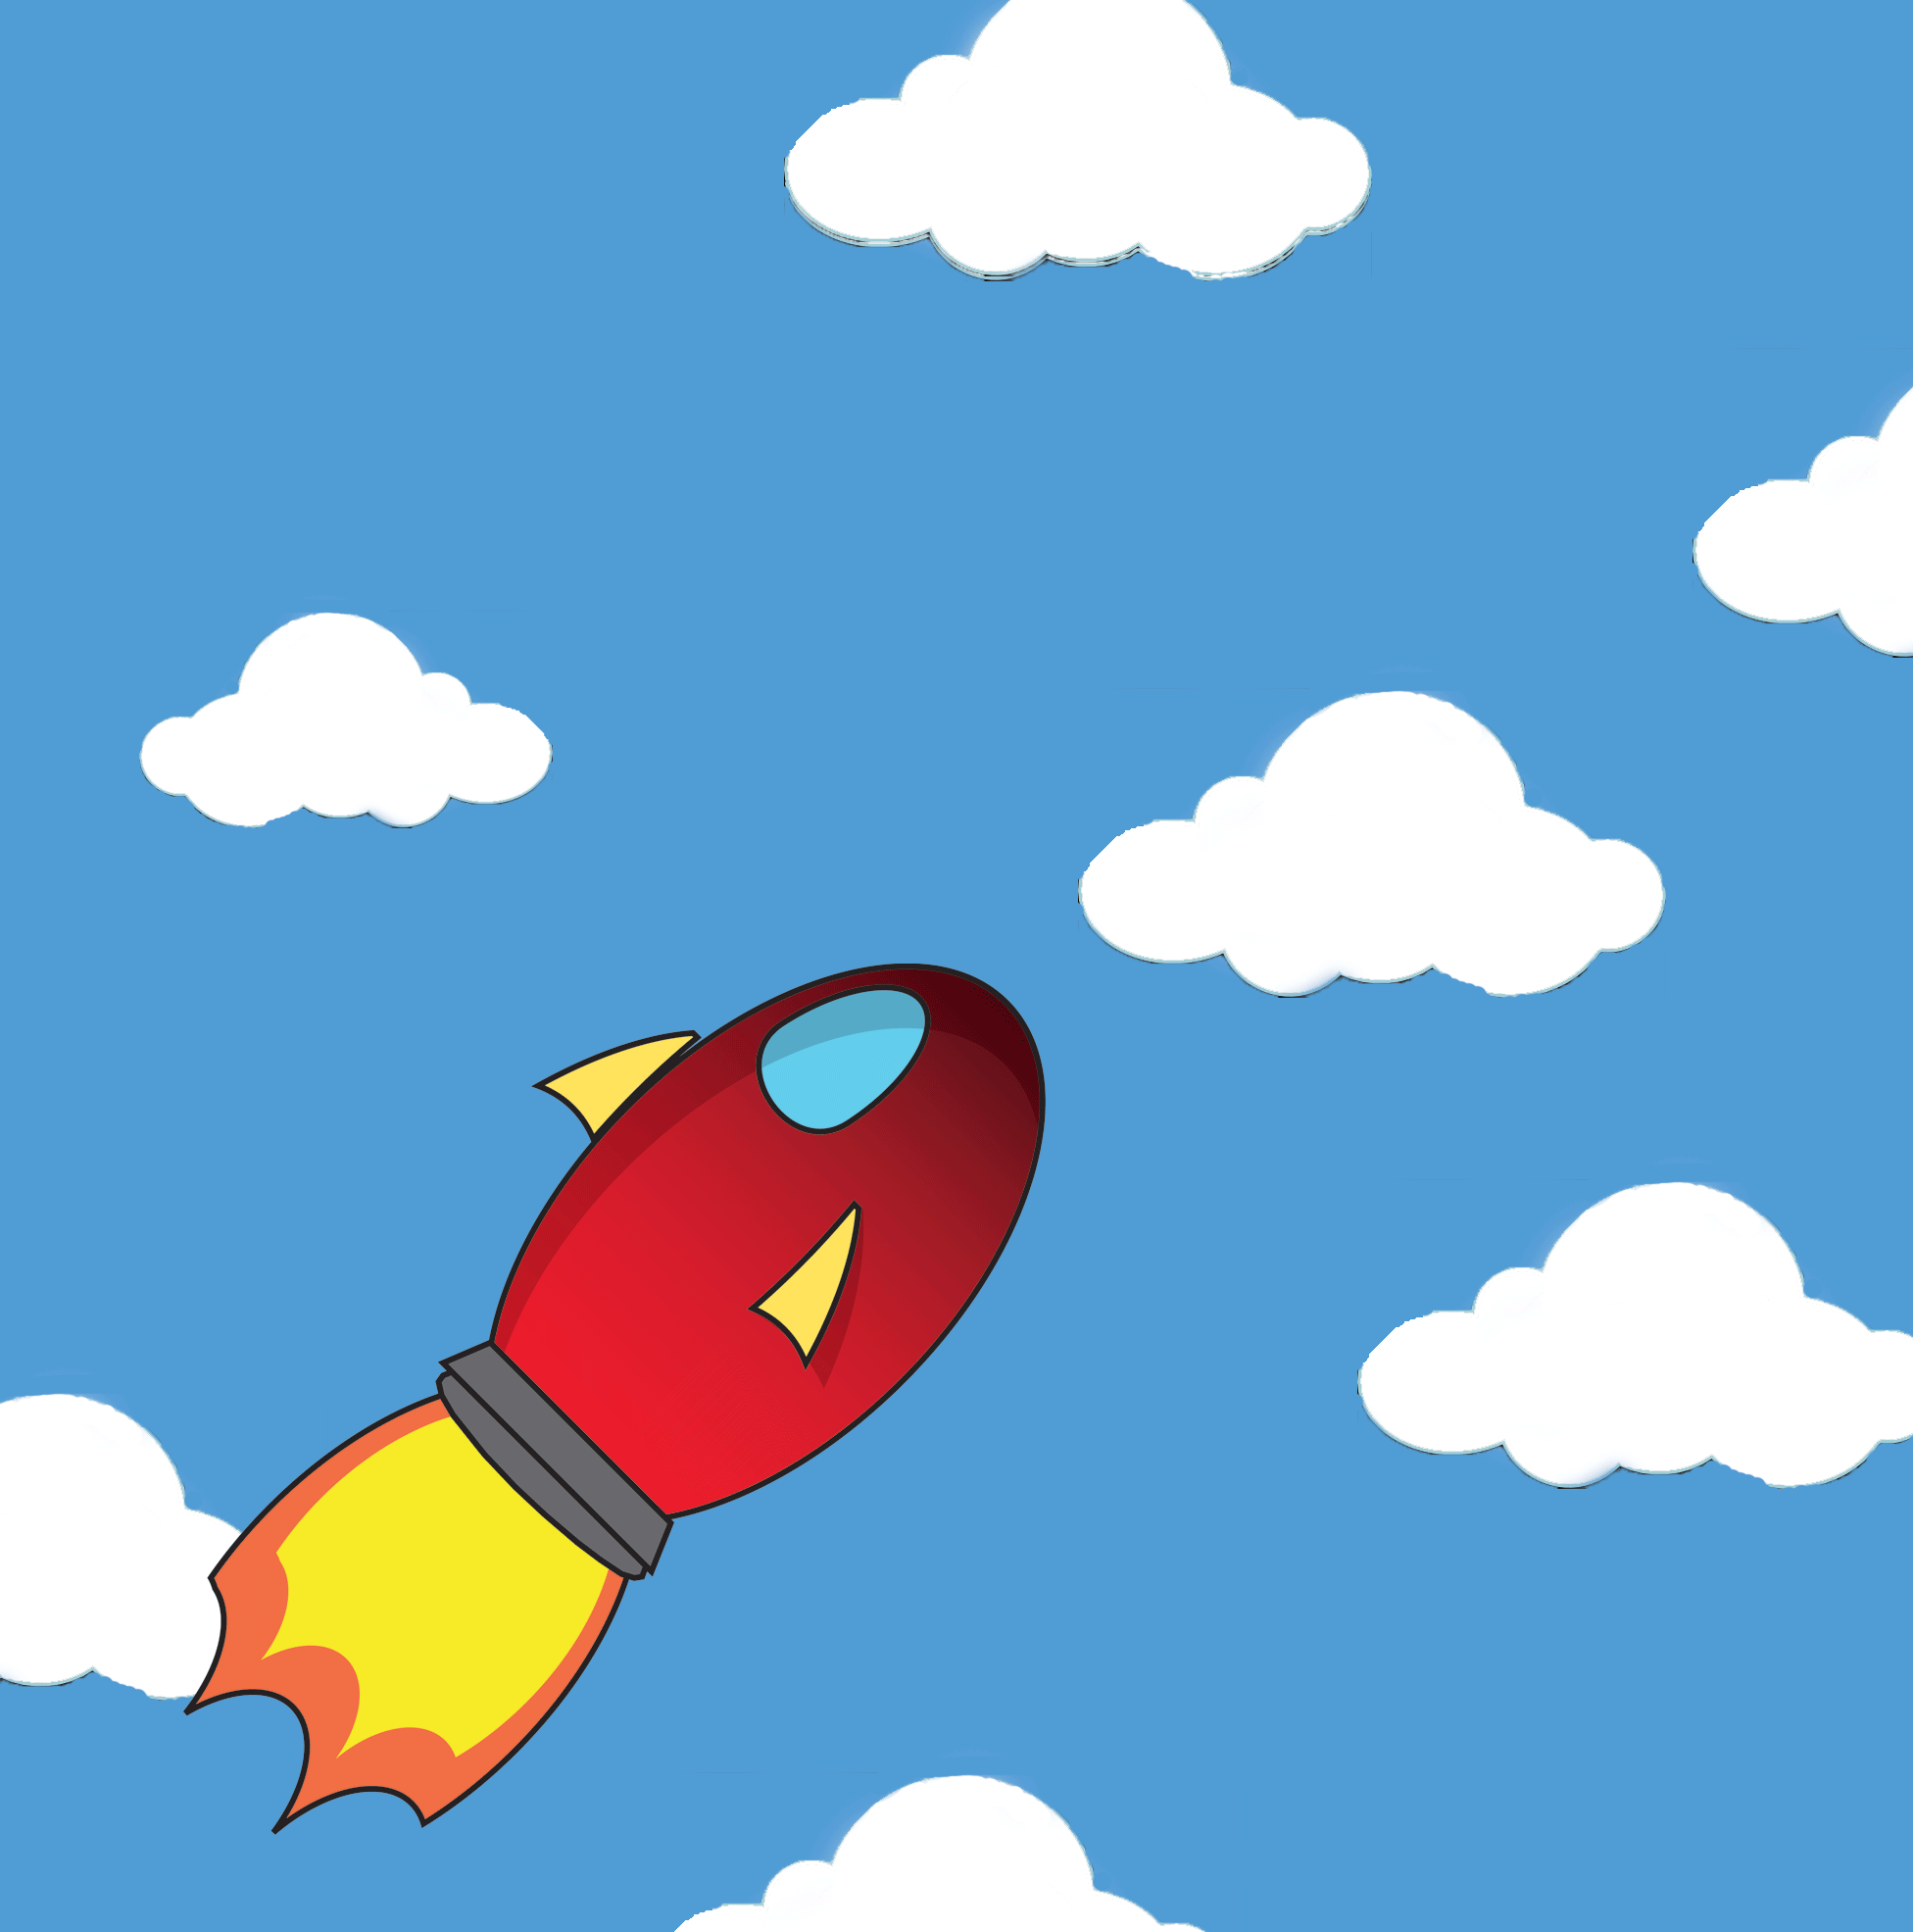 space-rocket-gif | Creations by E.White